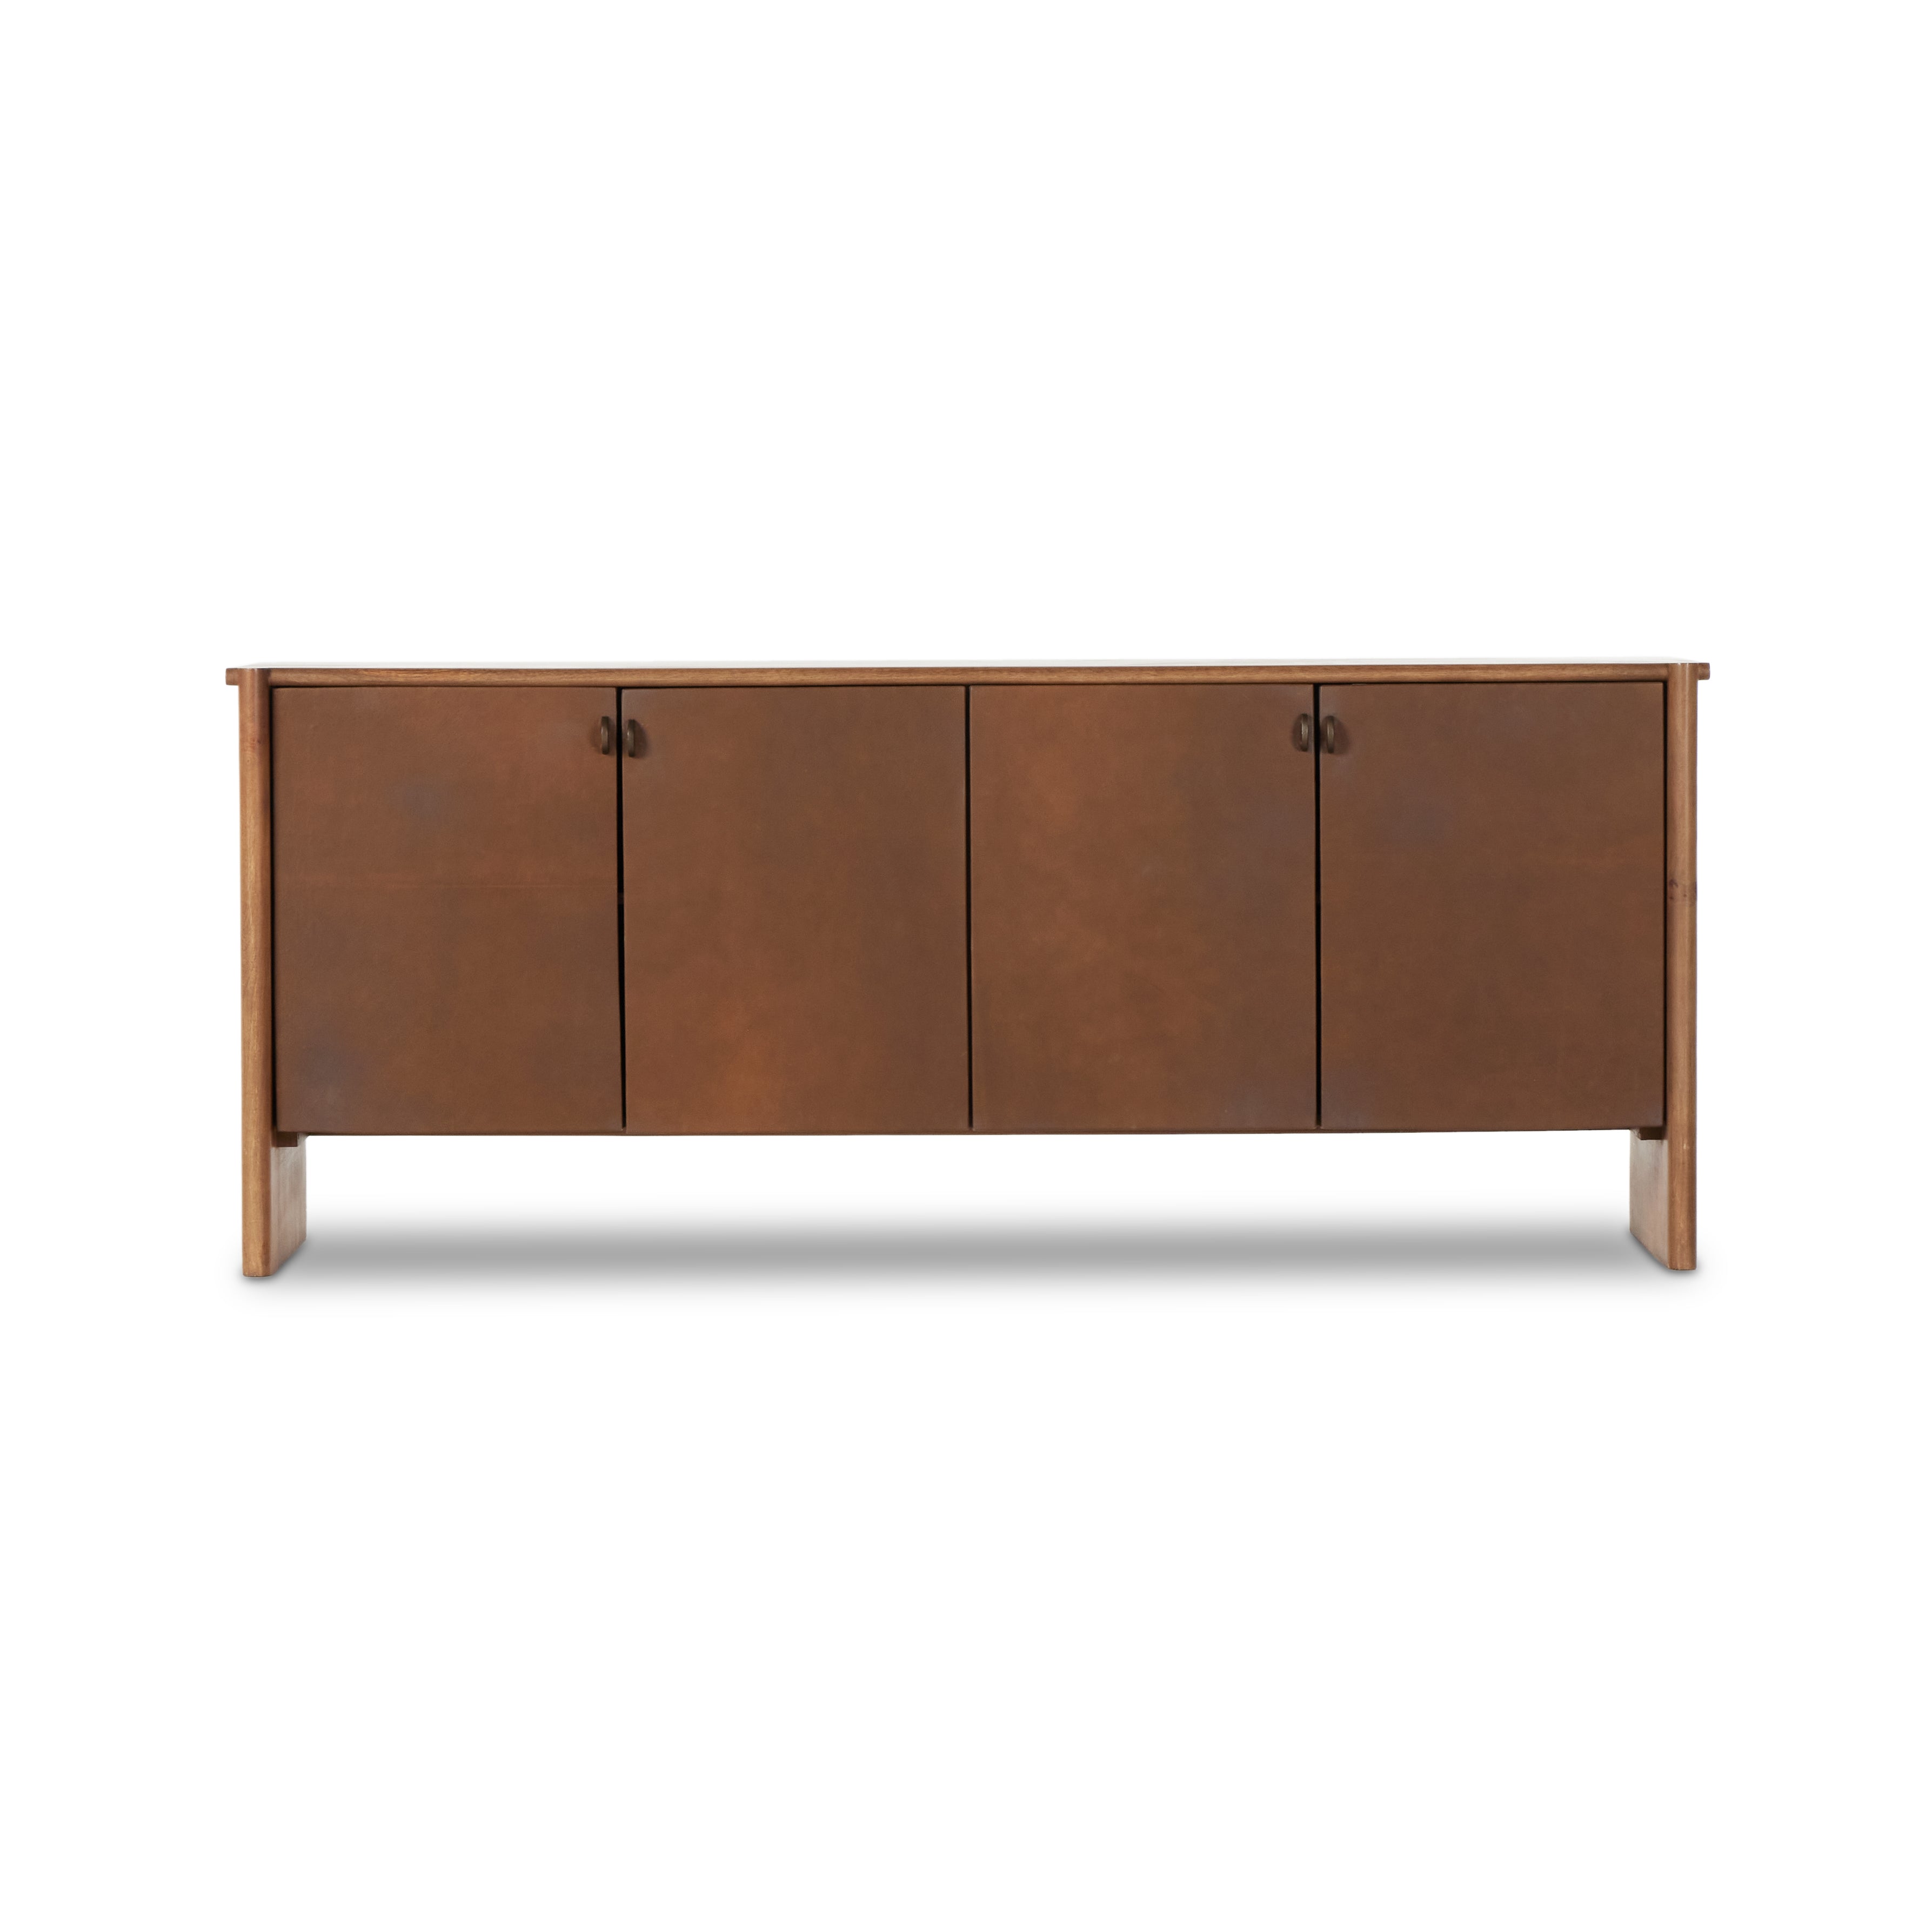 Curved edges and connection points meet leather door fronts, creating a smooth hand feel and look. Rounded offset hardware finishes this mango wood sideboard. Amethyst Home provides interior design, new construction, custom furniture, and area rugs in the Omaha metro area.